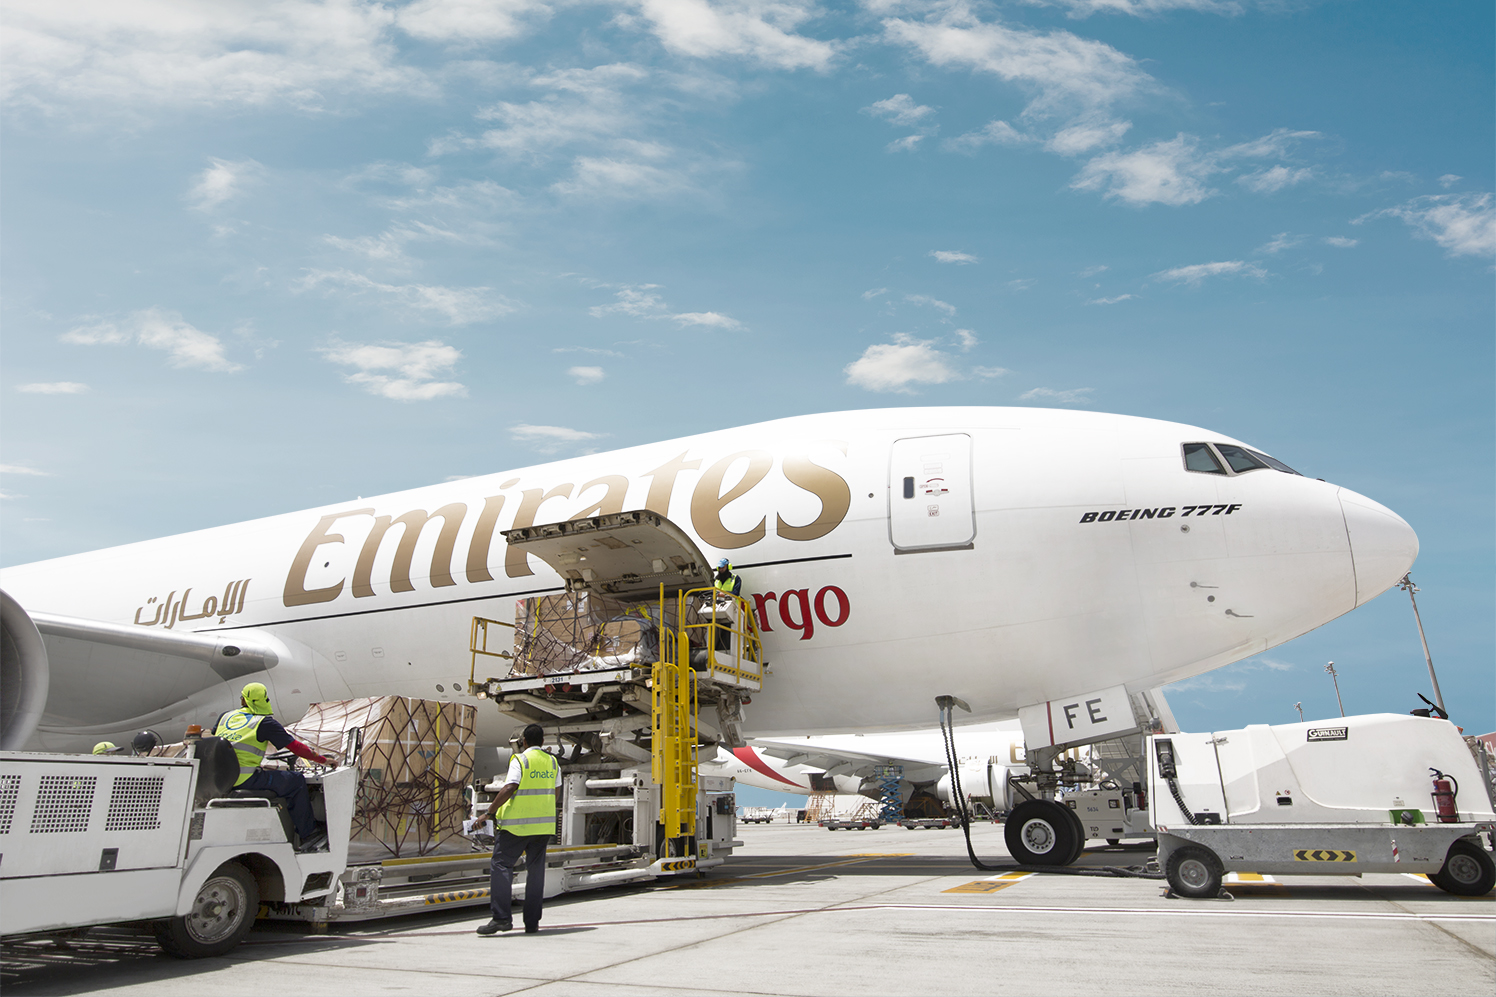 Emirates SkyCargo Boeing 777 freighter aircraft being loaded